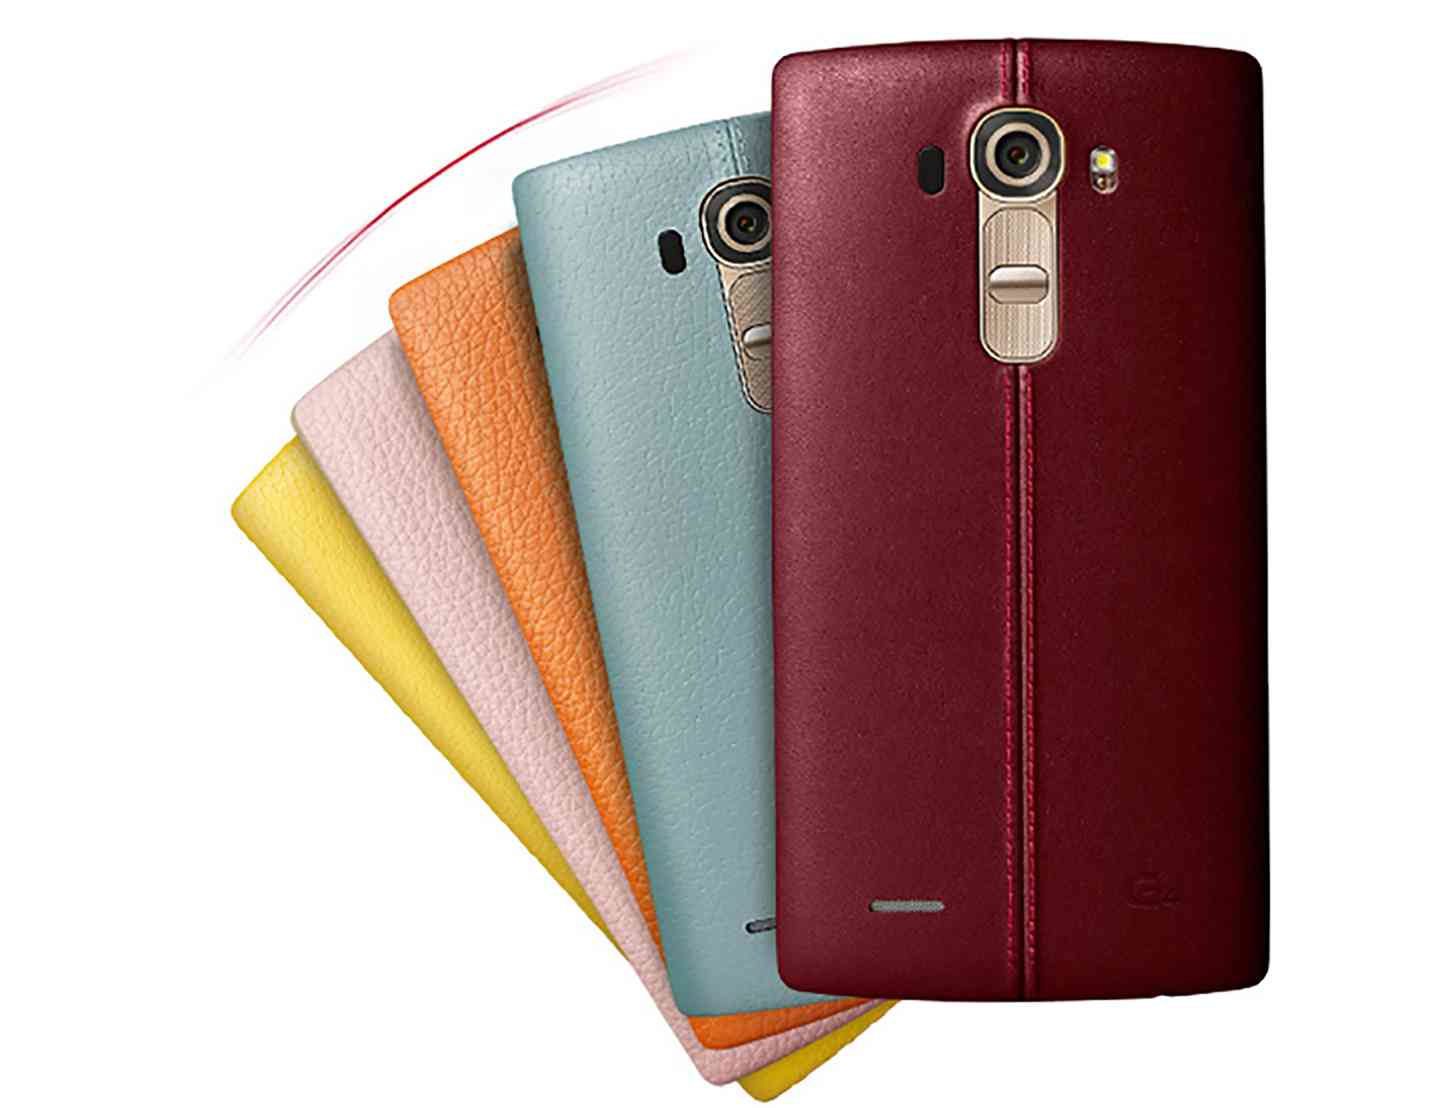 LG G4 leather back cover colors